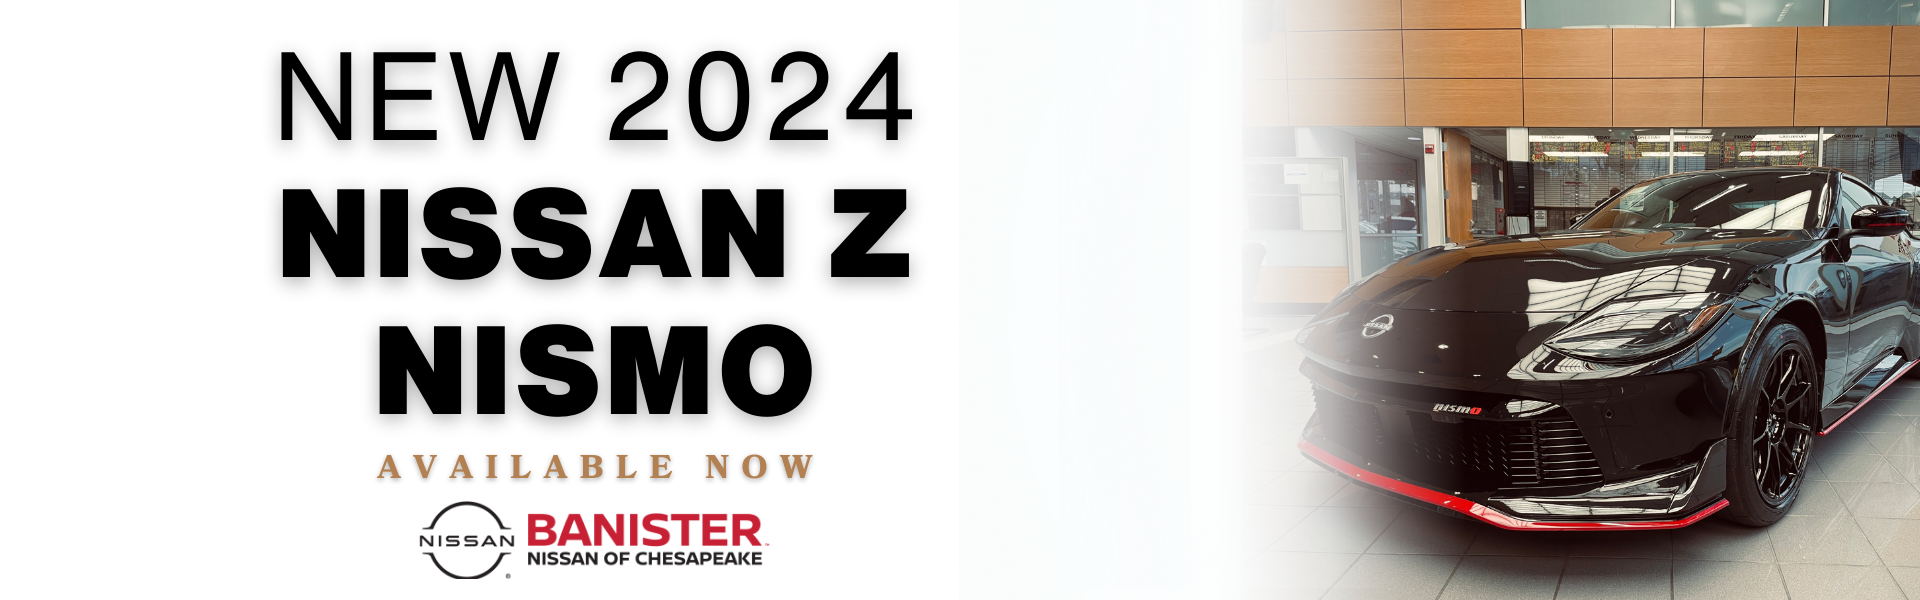 New 2024 Nissan Z Nismo Available Now at Banister Nissan